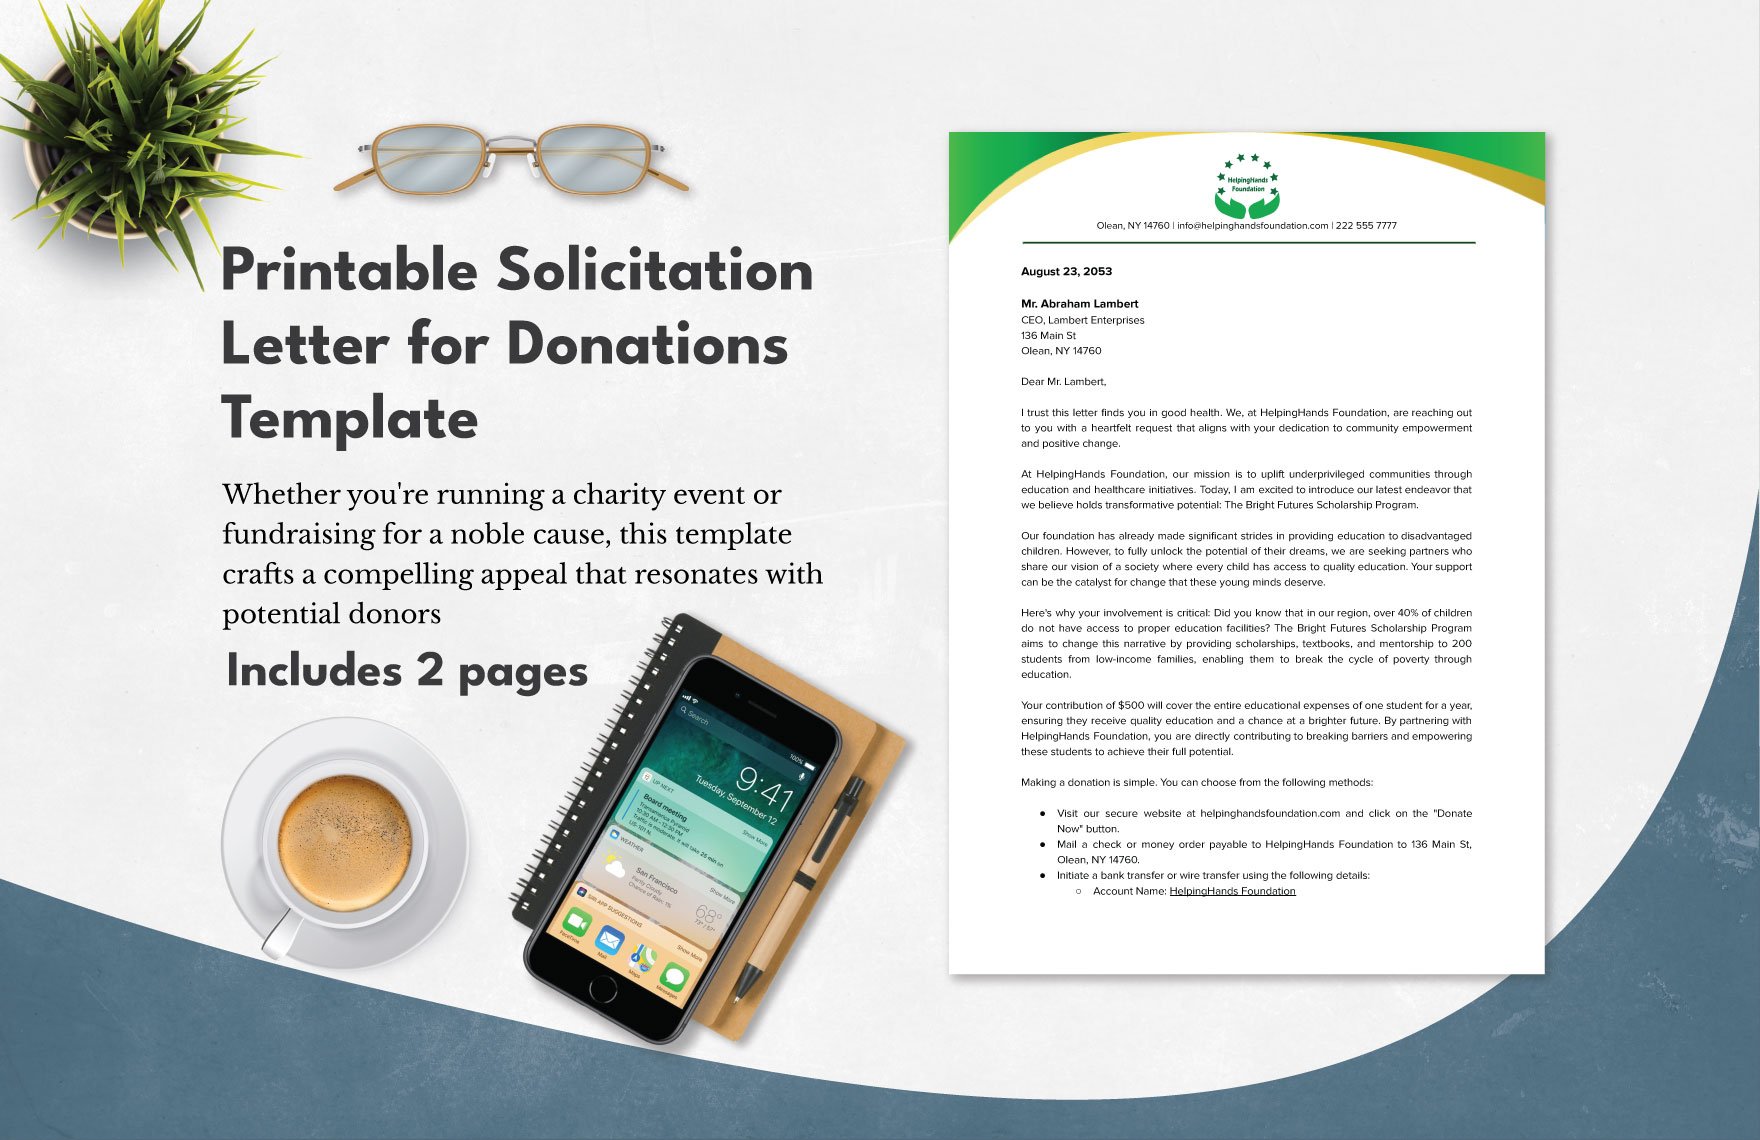 Printable Solicitation Letter for Donations Template